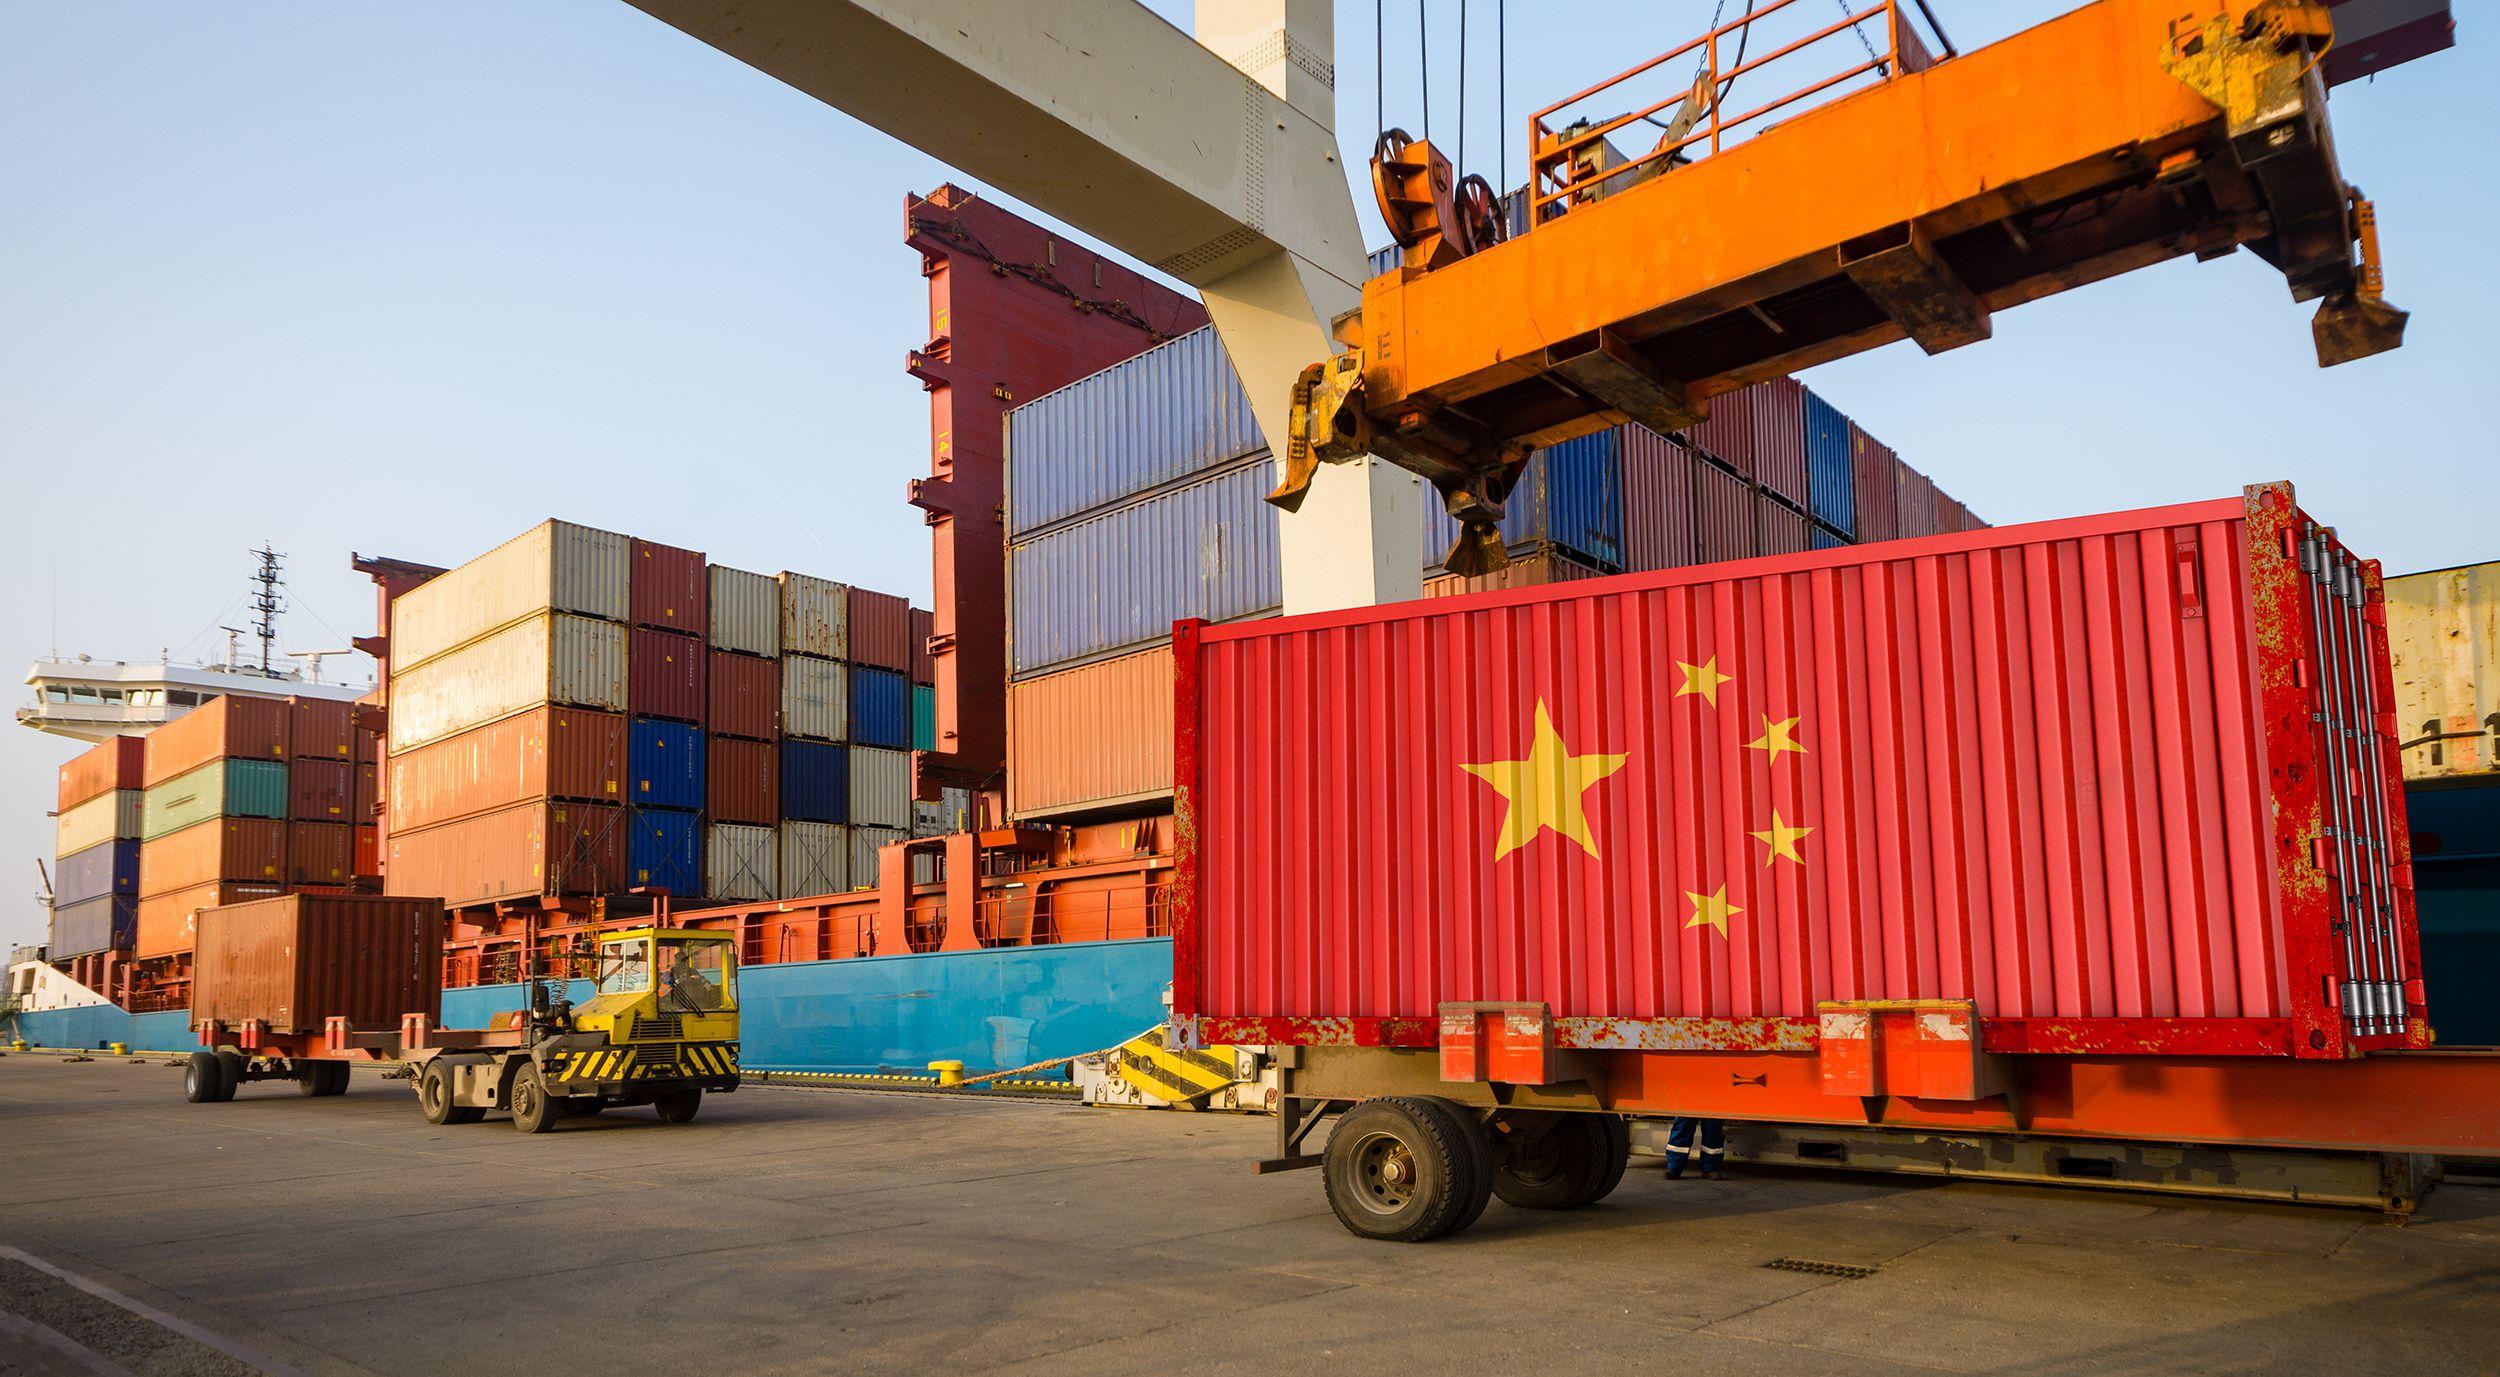 China's July Exports Experience Double-Digit Plunge, Adding Pressure to Bolster Ailing Economy_50.1